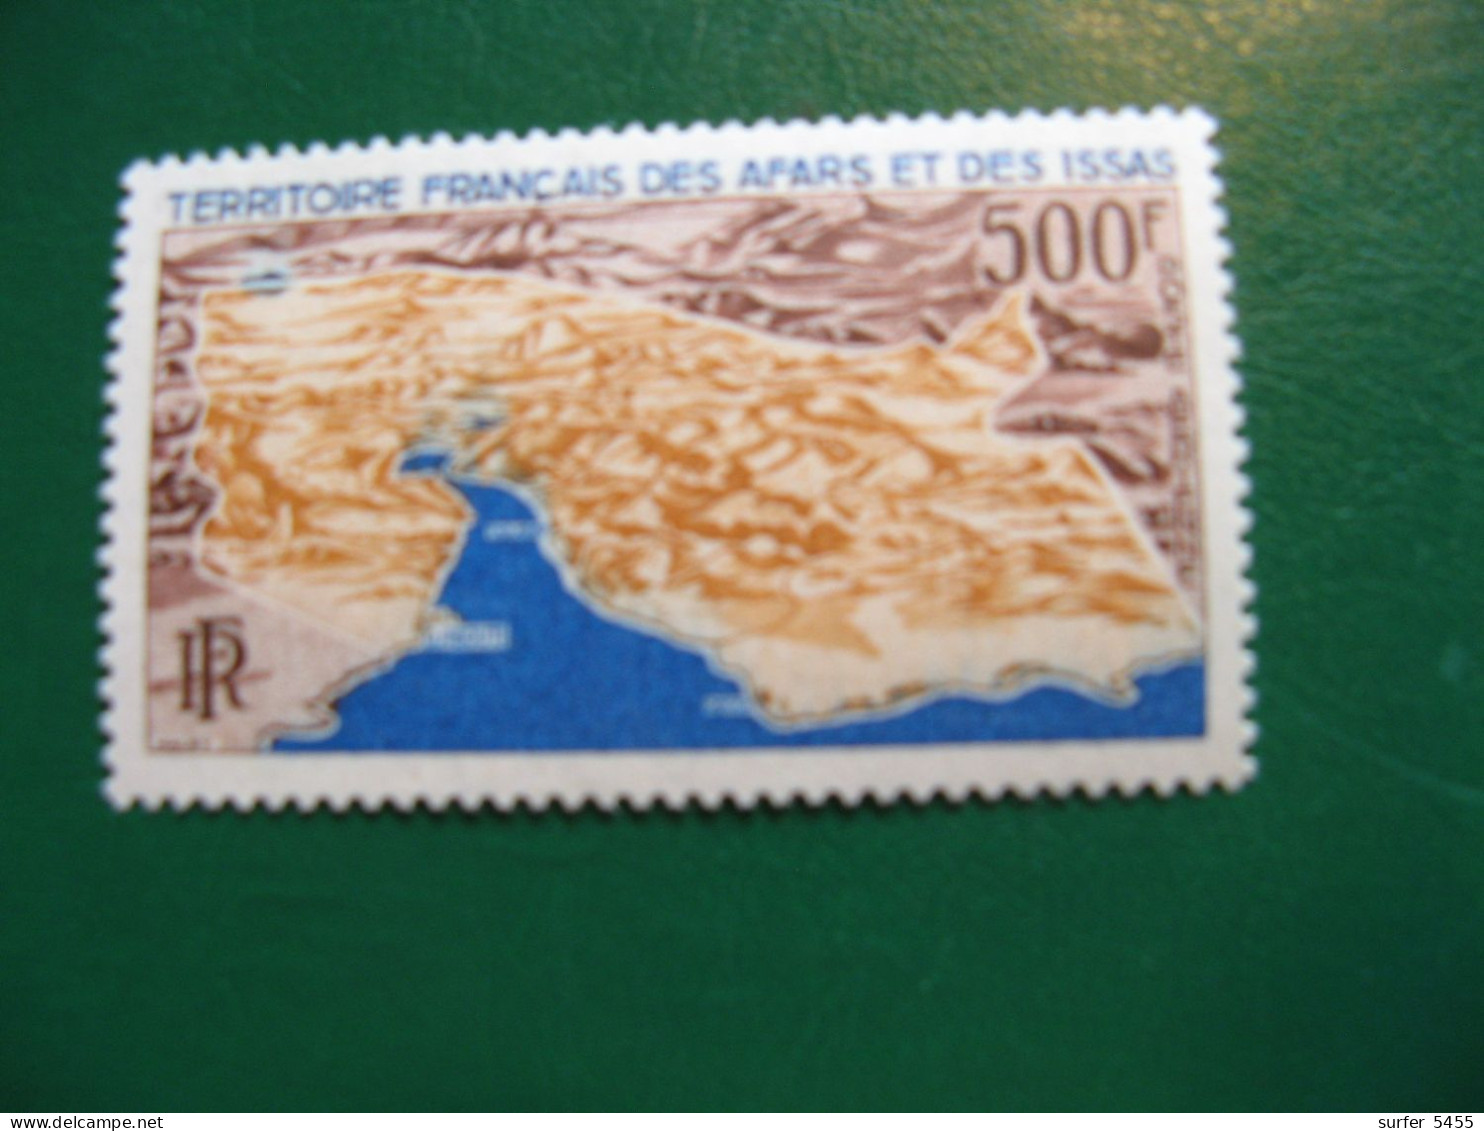 AFARS ET ISSAS - POSTE AERIENNE N° 59 - TIMBRE NEUF** LUXE -  MNH -  COTE 35,00 EUROS - Unused Stamps